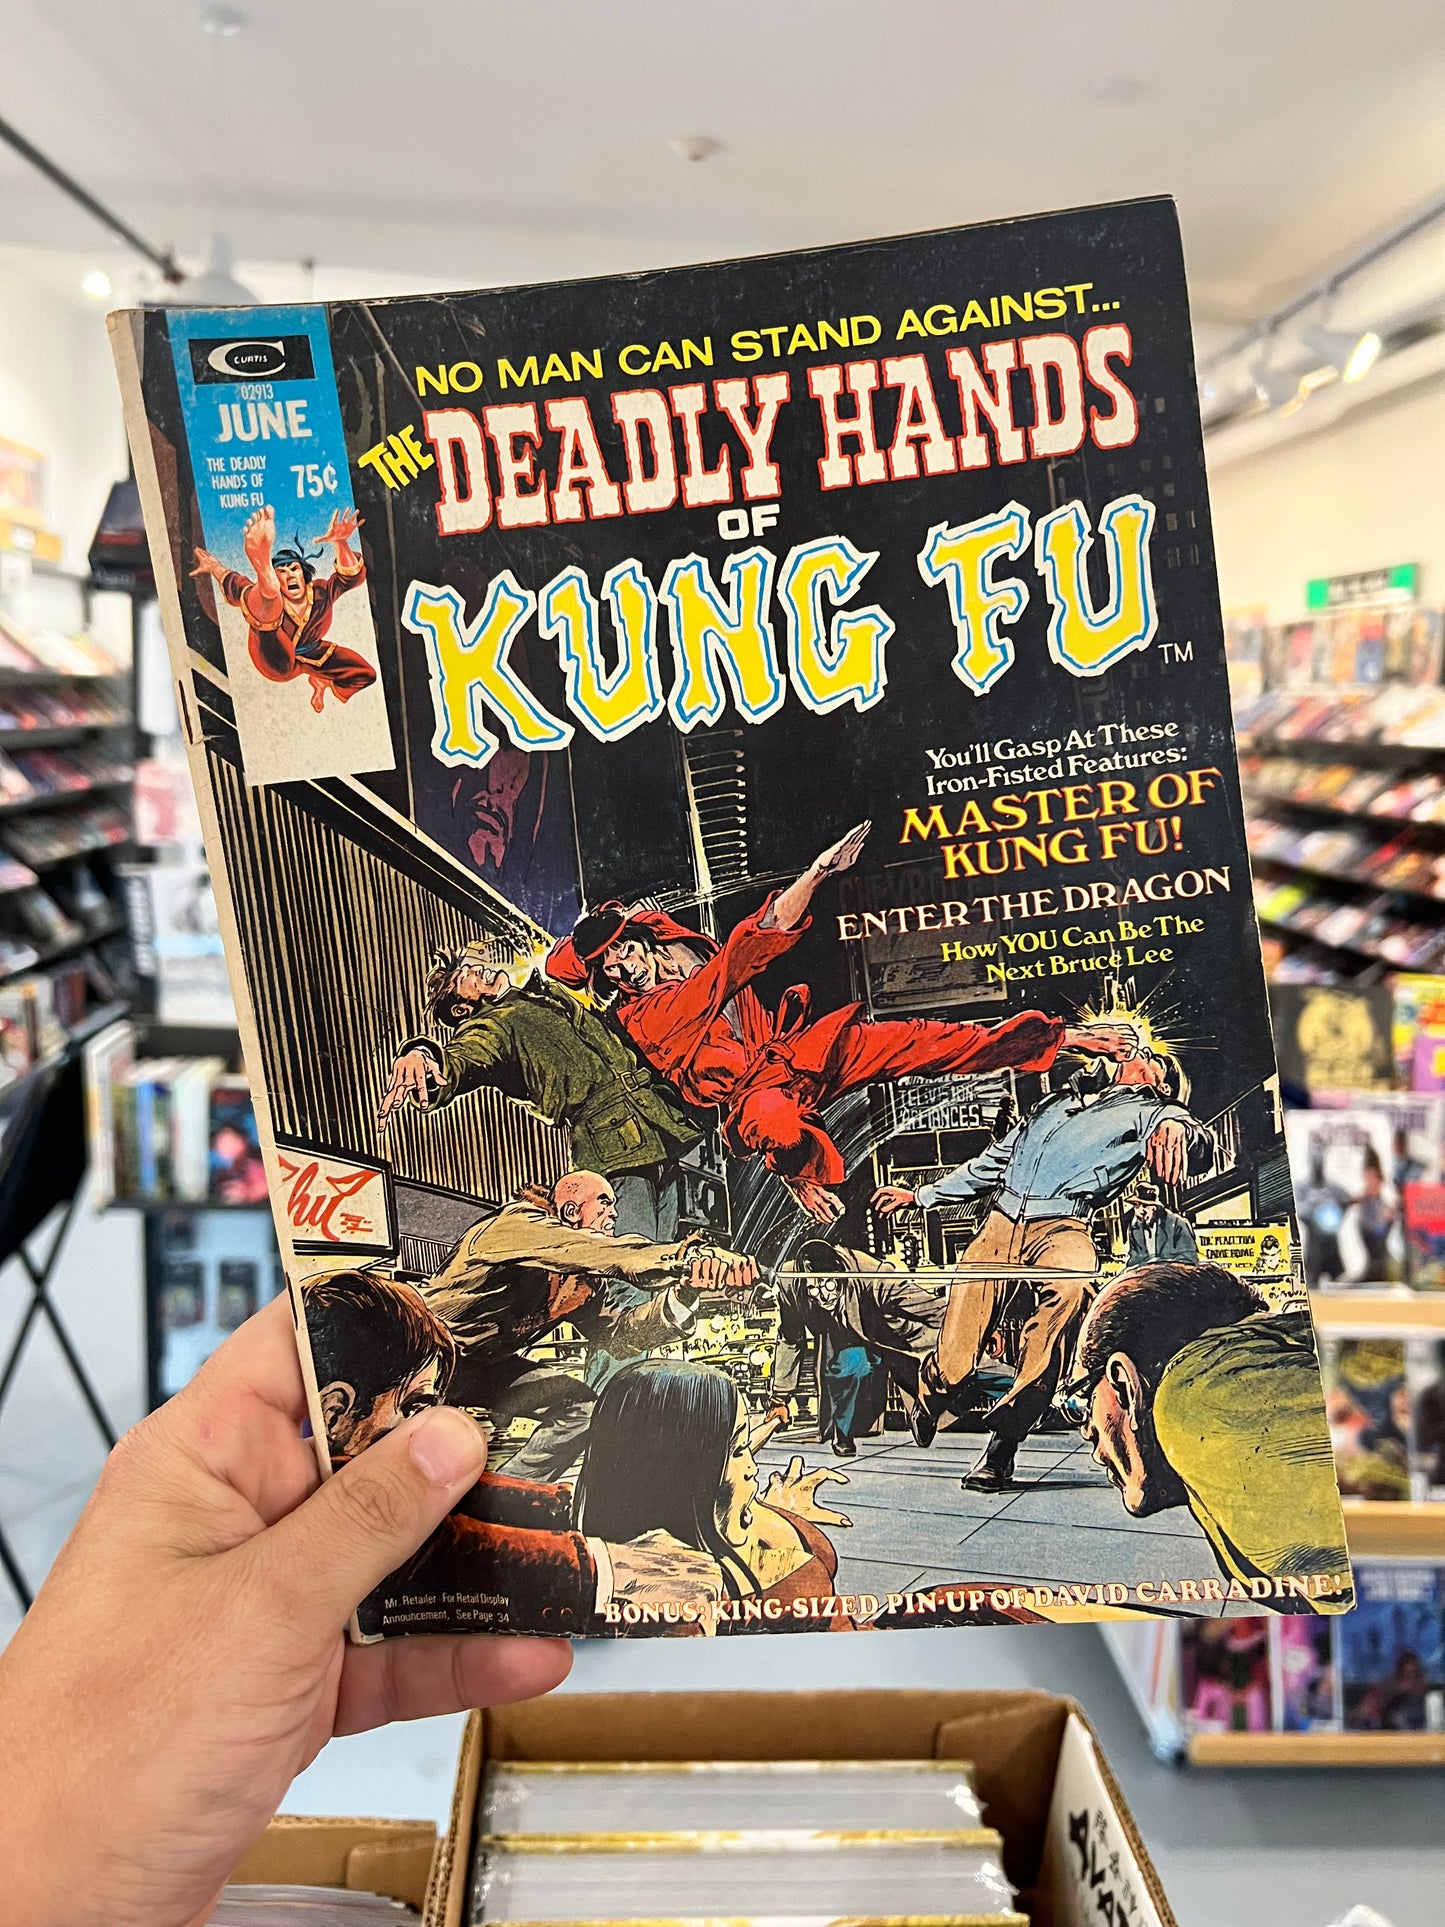 Deadly Hands of Kung Fu Magazine #1